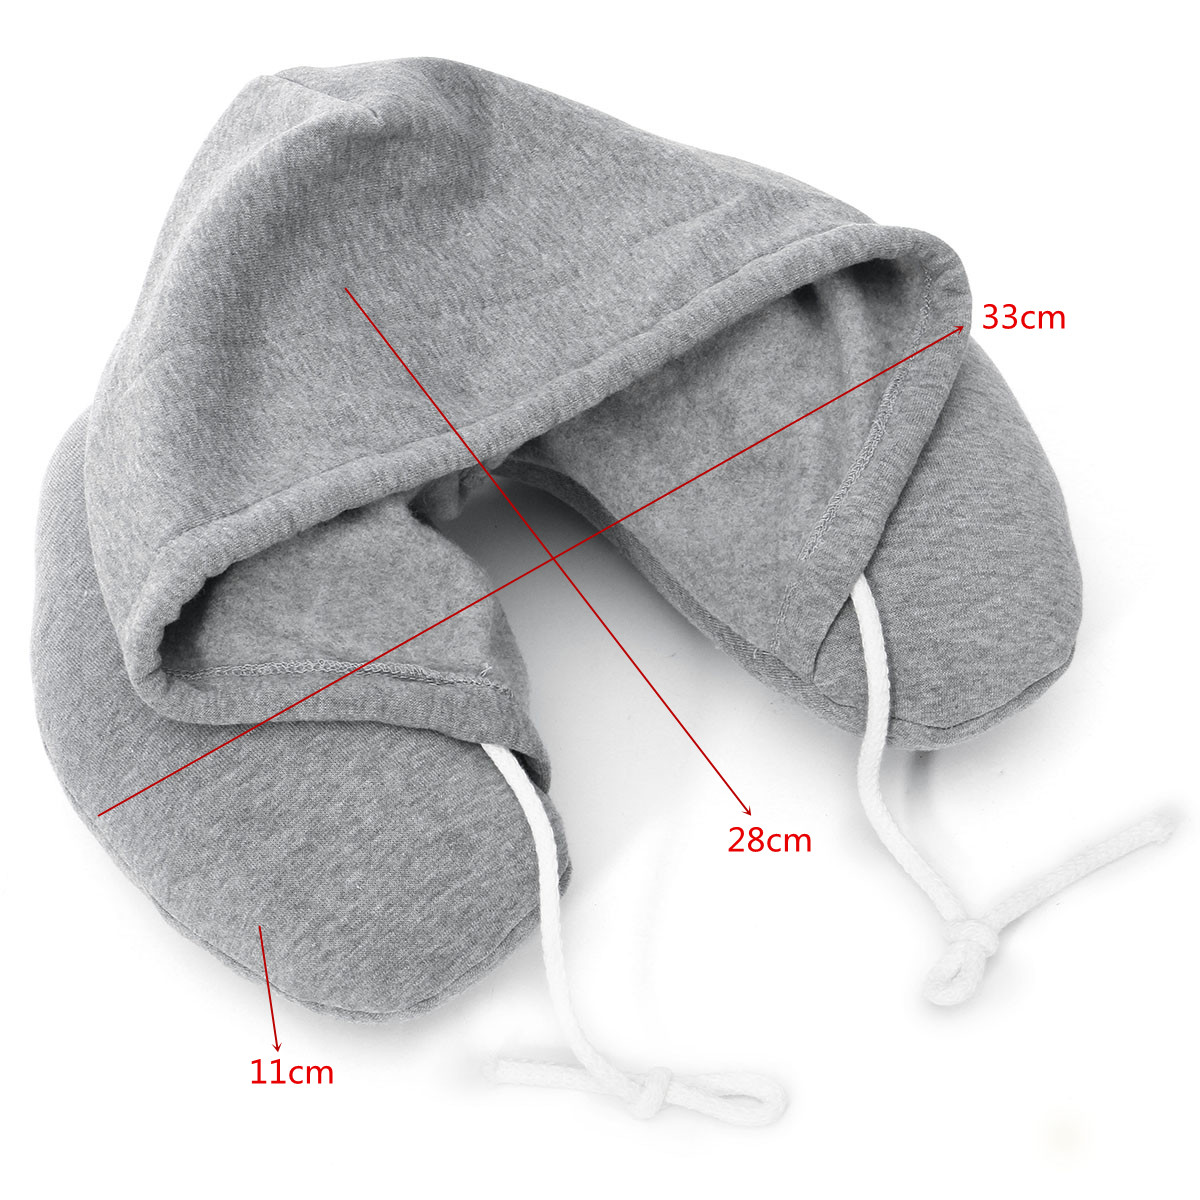 U-Shaped-Hooded-Pillow-Cushion-Winter-Warm-Hat-Rest-Neck-Support-Winter-Warm-1243401-3